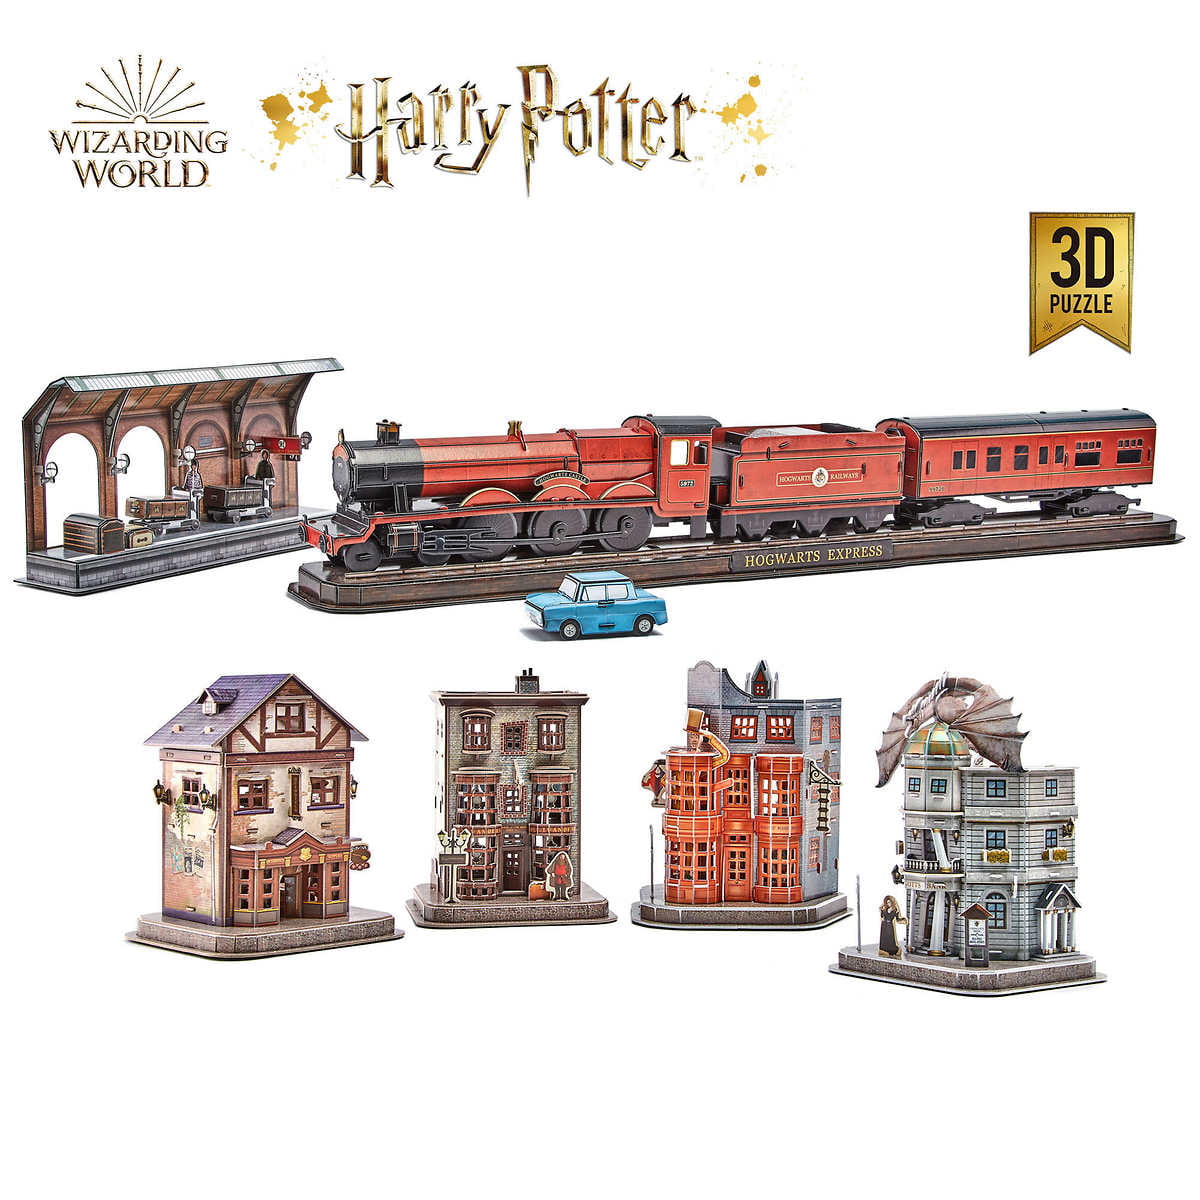 Details about   Harry Potter Hogwarts Express 3D Puzzle With No Need For Tools Or Scissors NEW 